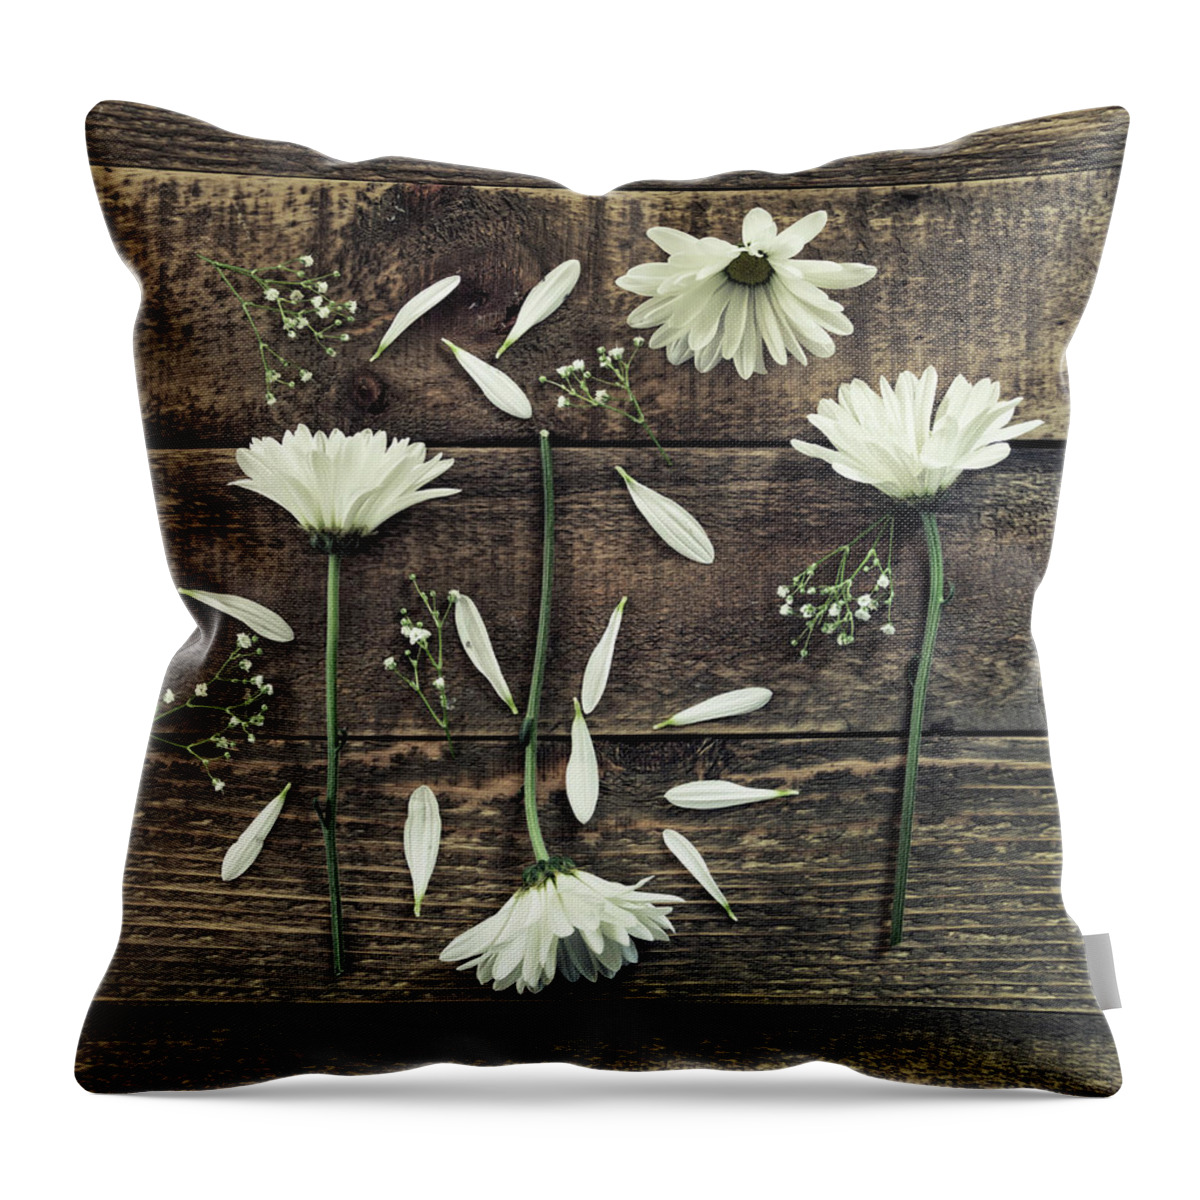 Daisy Throw Pillow featuring the photograph She Loves Me by Kim Hojnacki